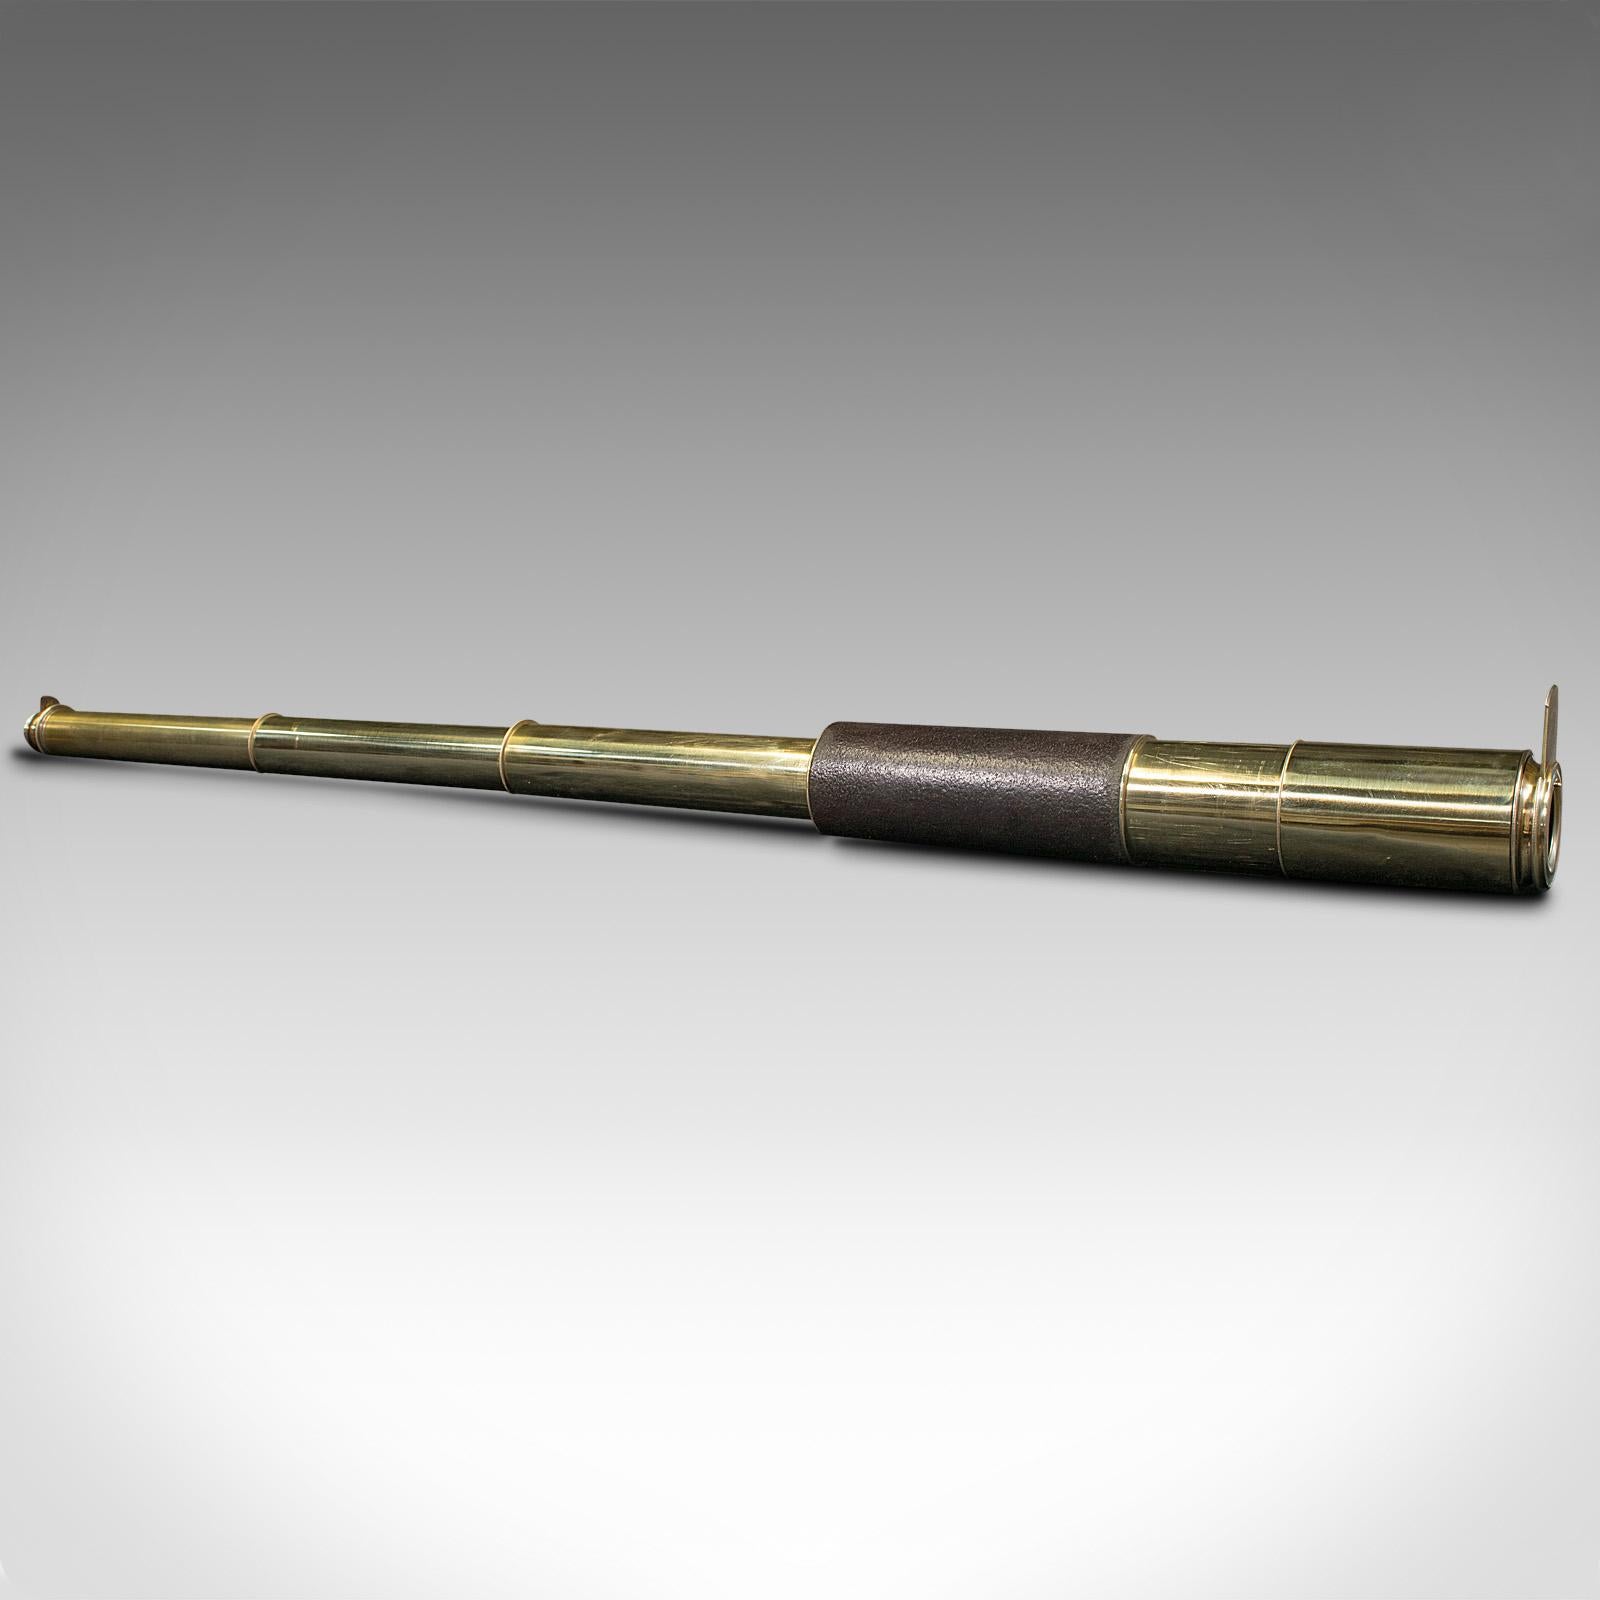 This is an antique 3-draw telescope. An English, brass and leather terrestrial or astronomical refractor, dating to the Victorian period, circa 1870.

Perfect for bird watching, landscape appreciation, wildlife, or maritime observation. Equally